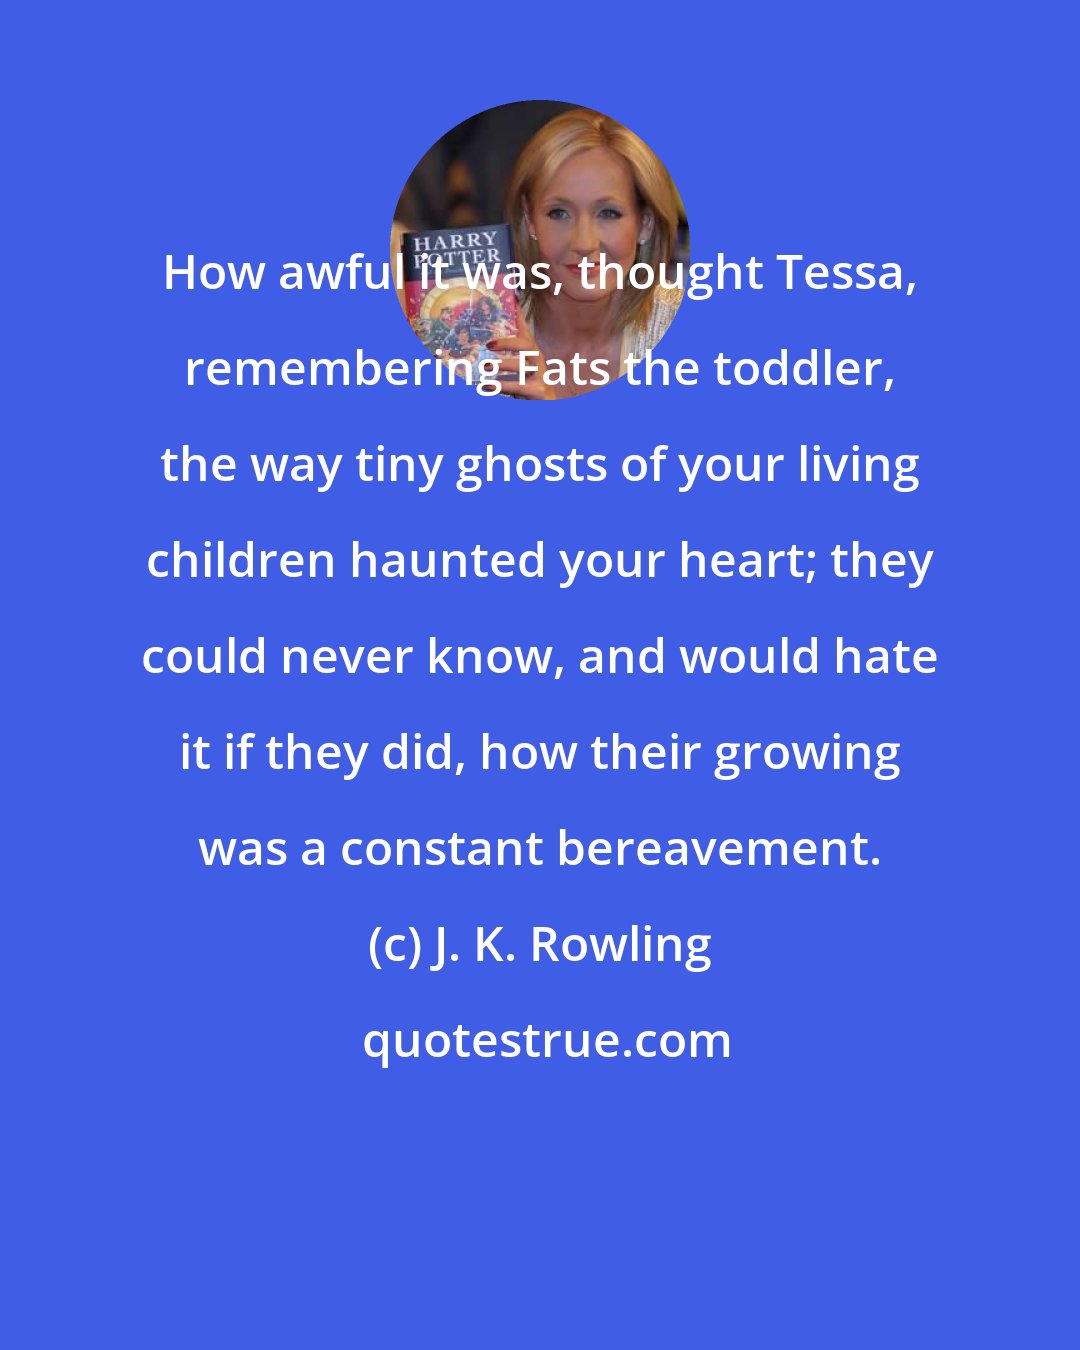 J. K. Rowling: How awful it was, thought Tessa, remembering Fats the toddler, the way tiny ghosts of your living children haunted your heart; they could never know, and would hate it if they did, how their growing was a constant bereavement.